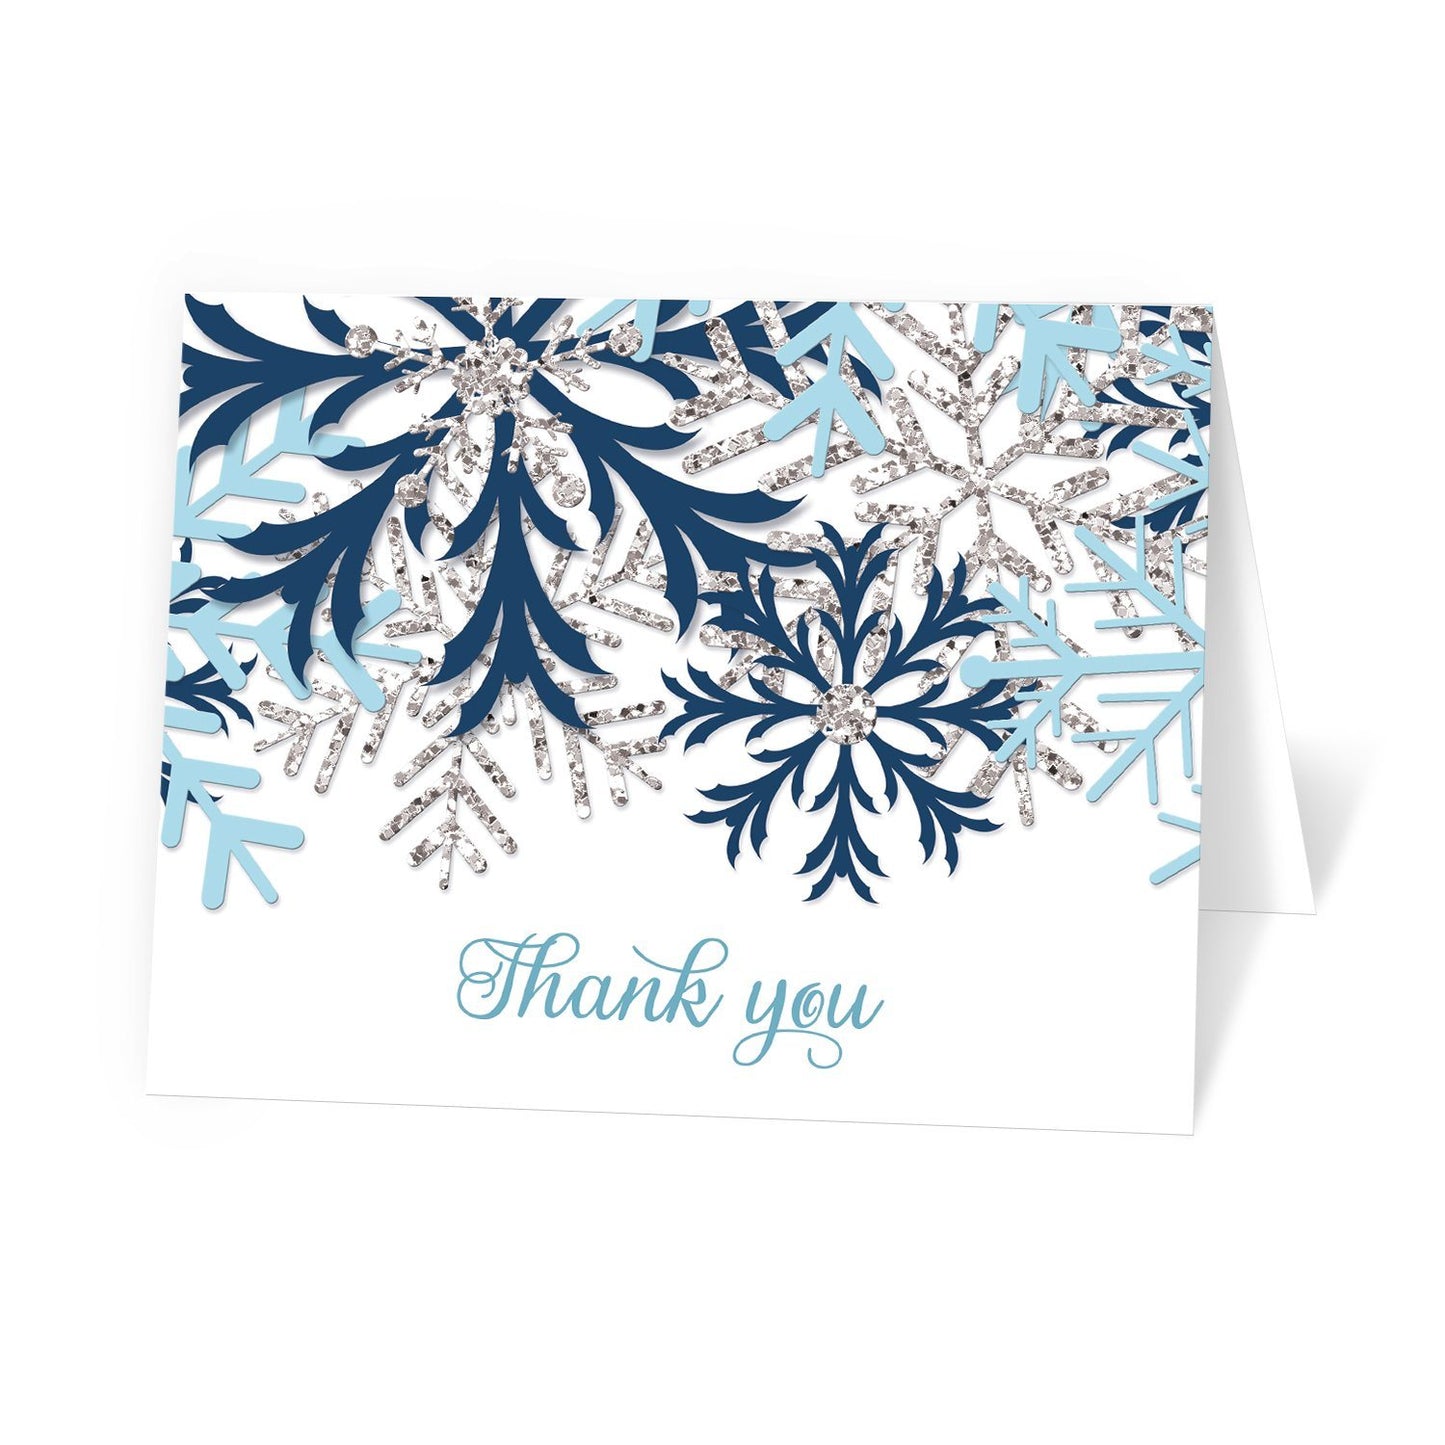 Winter Blue Silver Snowflake Thank You Cards at Artistically Invited. Winter blue silver snowflake thank you cards with navy blue, silver-colored glitter-illustrated, and aqua blue snowflakes over a white background and 'Thank you' printed in a whimsical blue script font. 